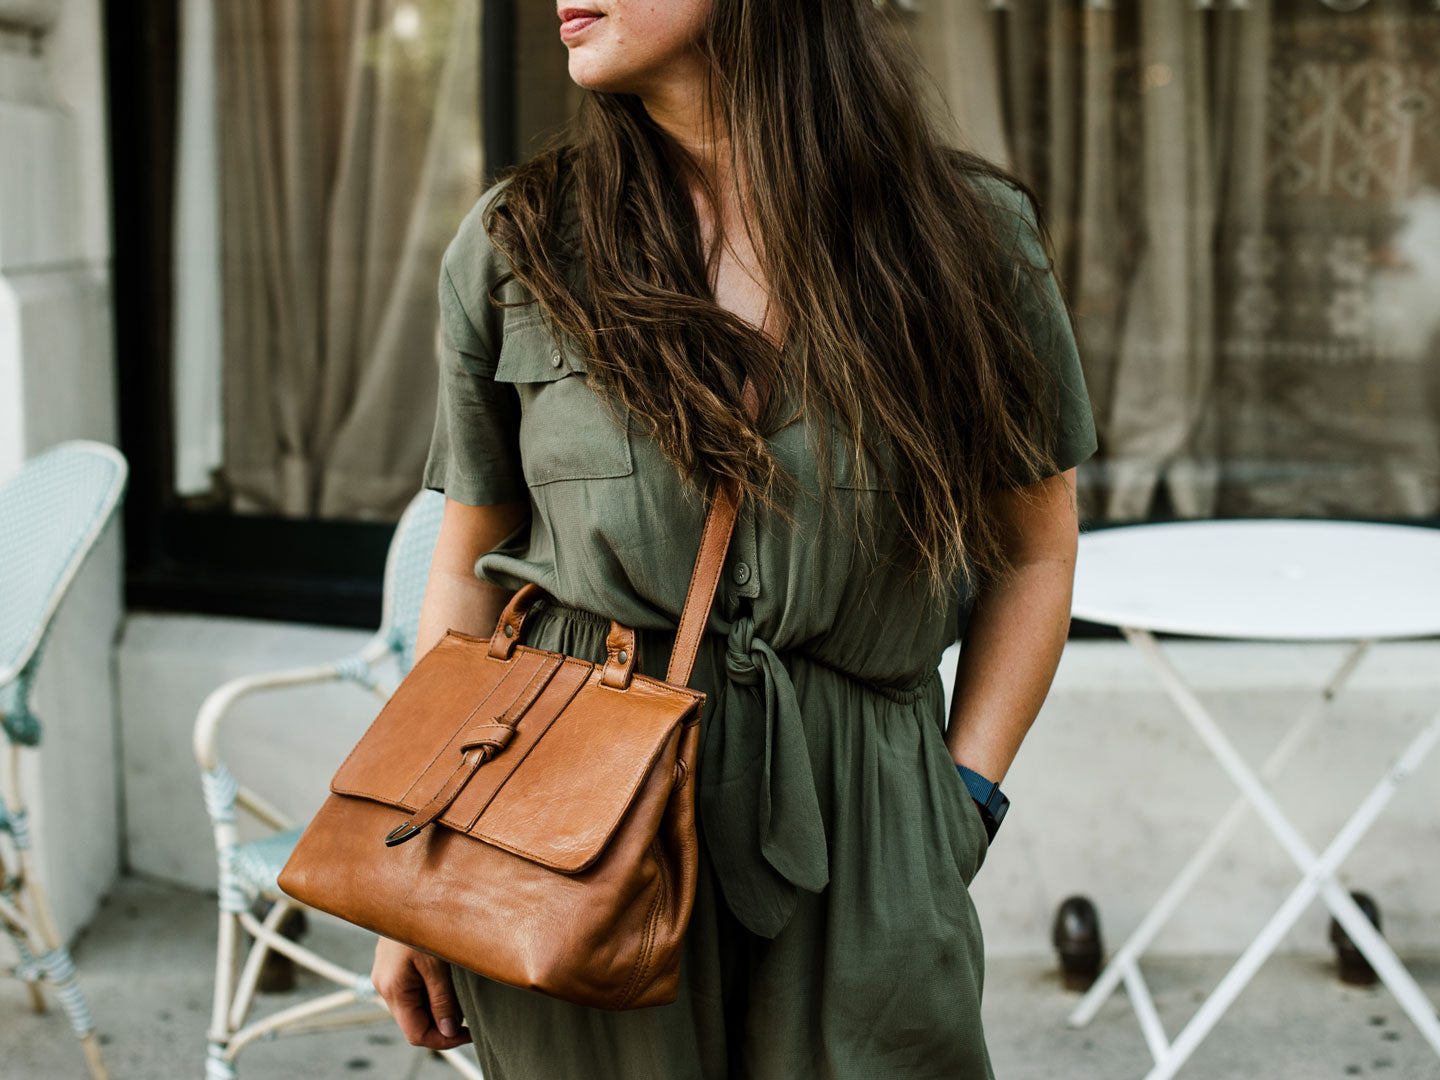 Pocketbook vs Purse: What's the difference?